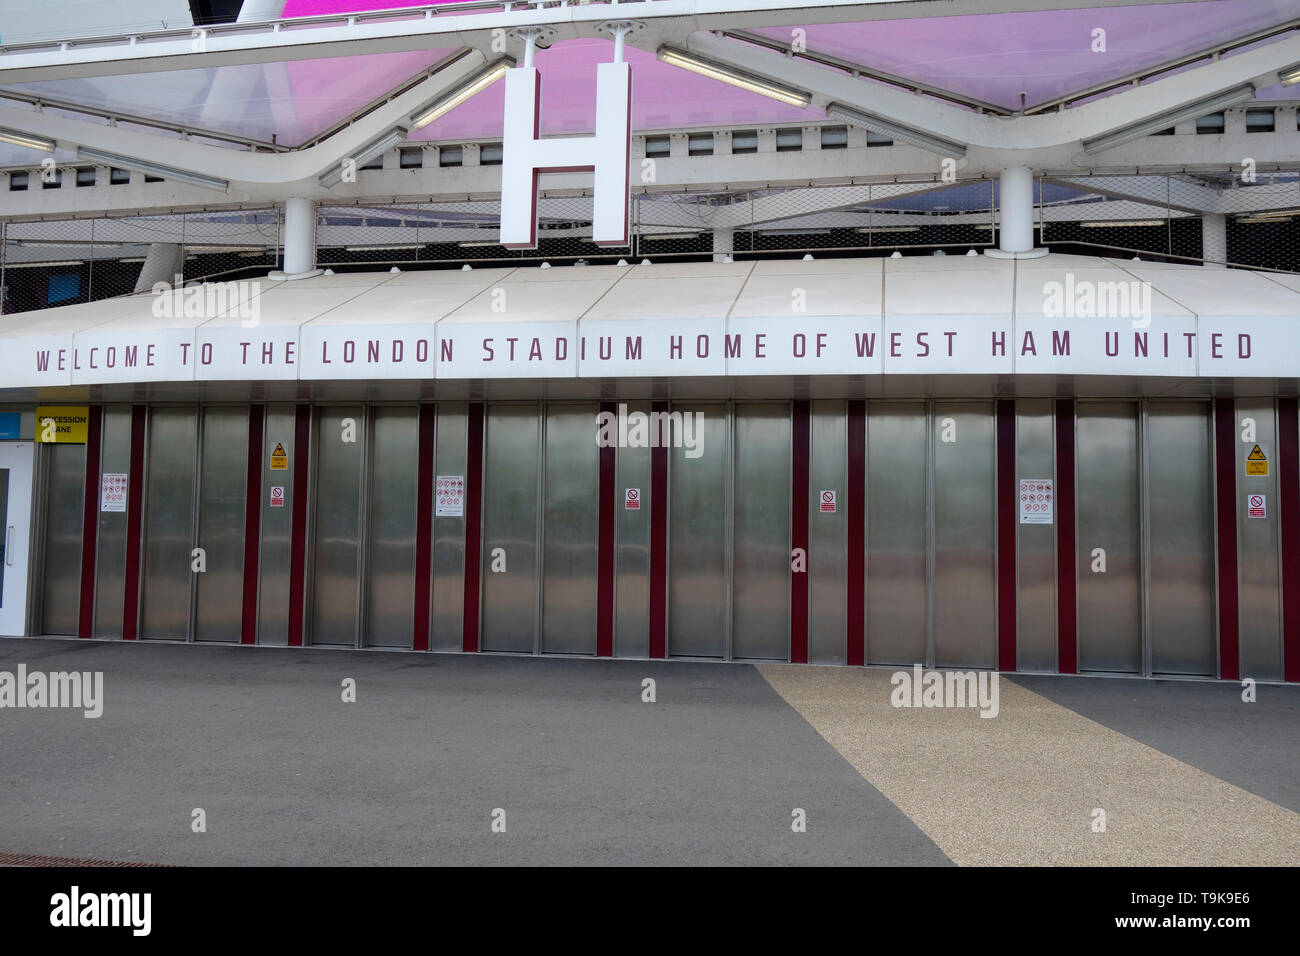 The London Stadium home to West Ham United in the Queen Elizabeth Olympic Park at Stratford, East London UK. Stock Photo